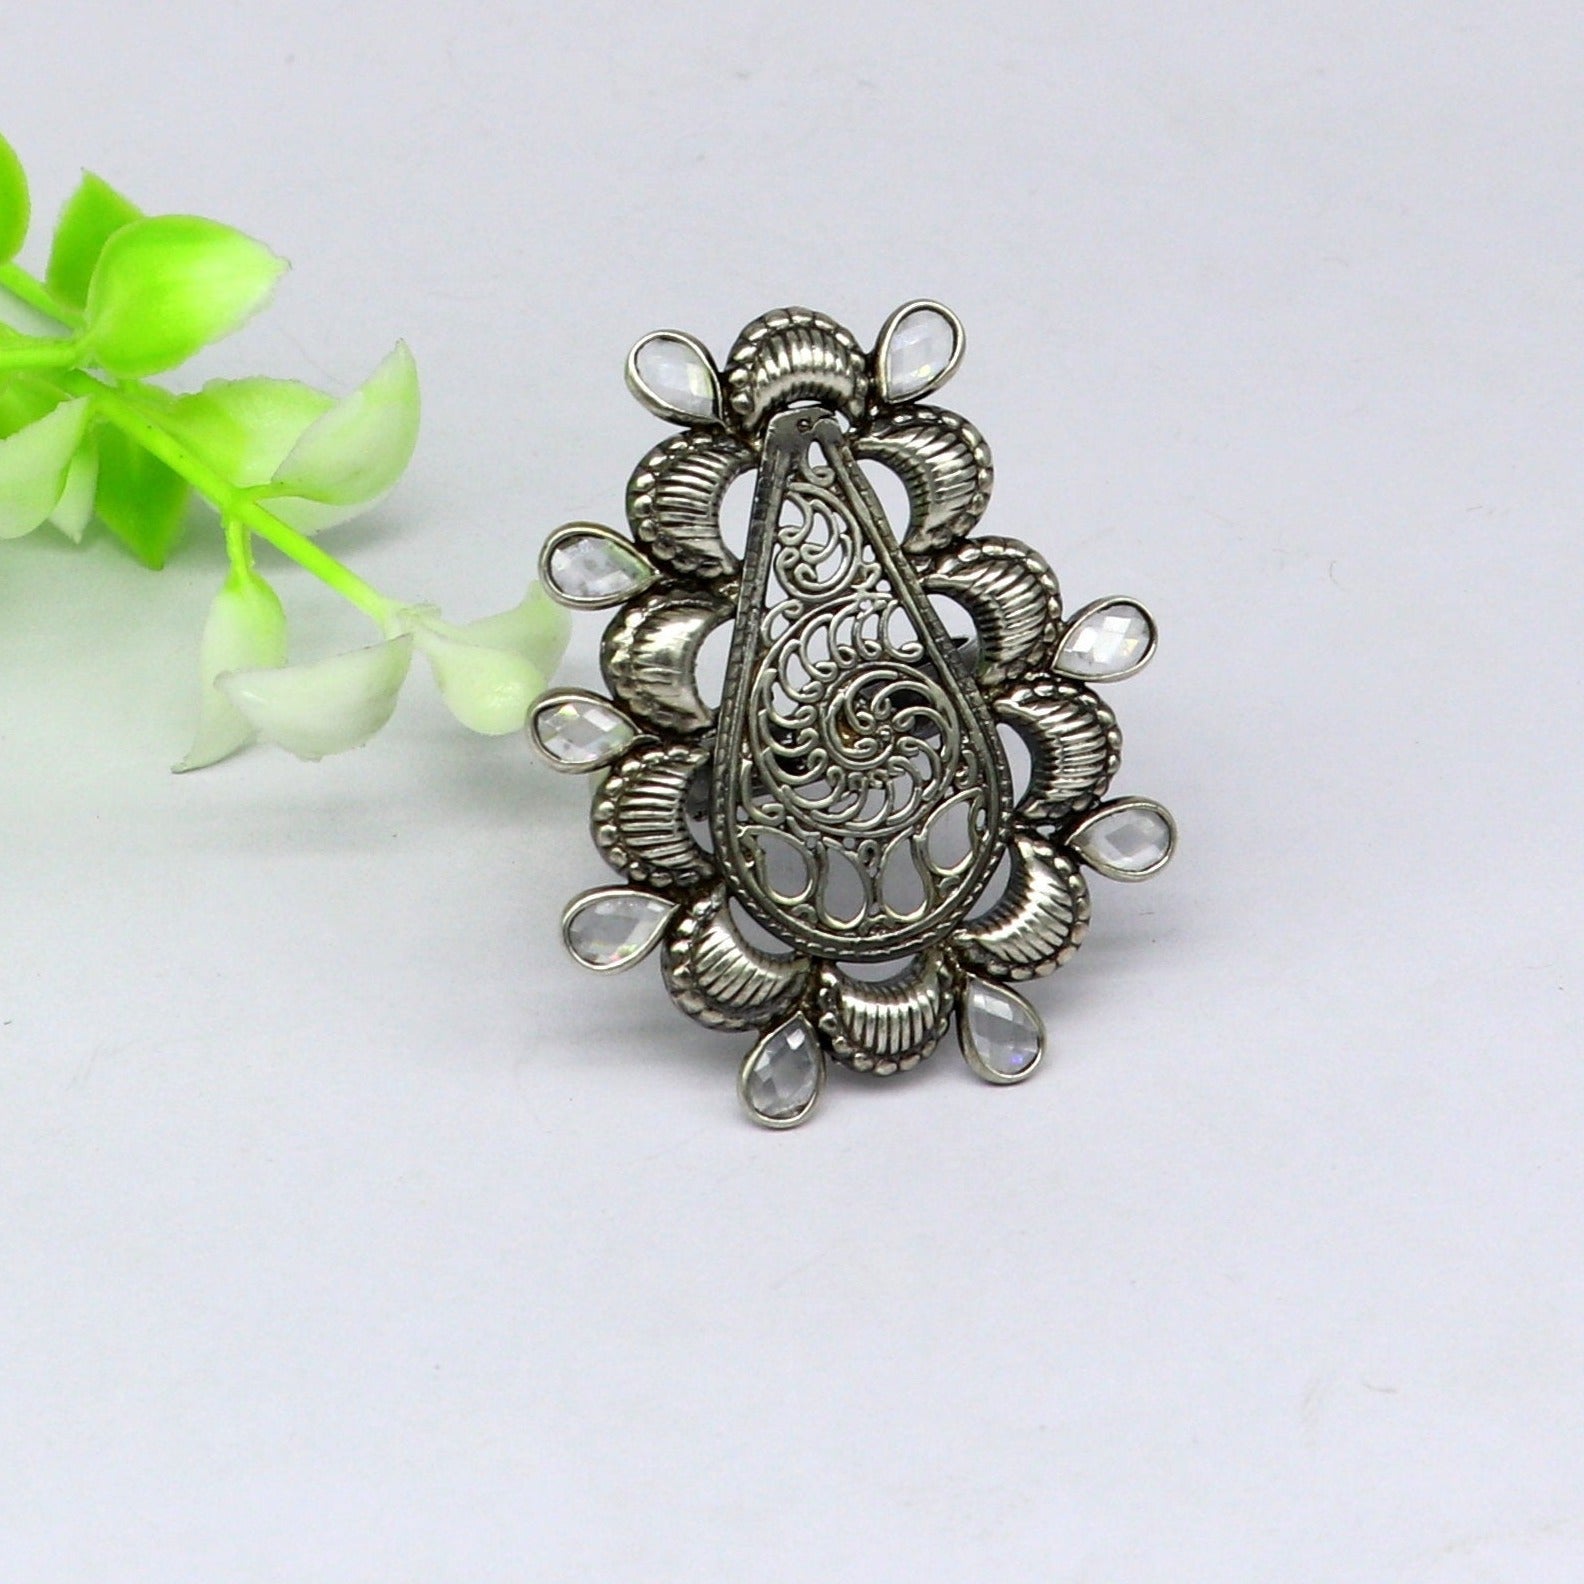 Vintage antique design handmade 925 sterling silver gorgeous charm ring adjustable band,stylish gifting stone work tribal jewelry ring245 - TRIBAL ORNAMENTS